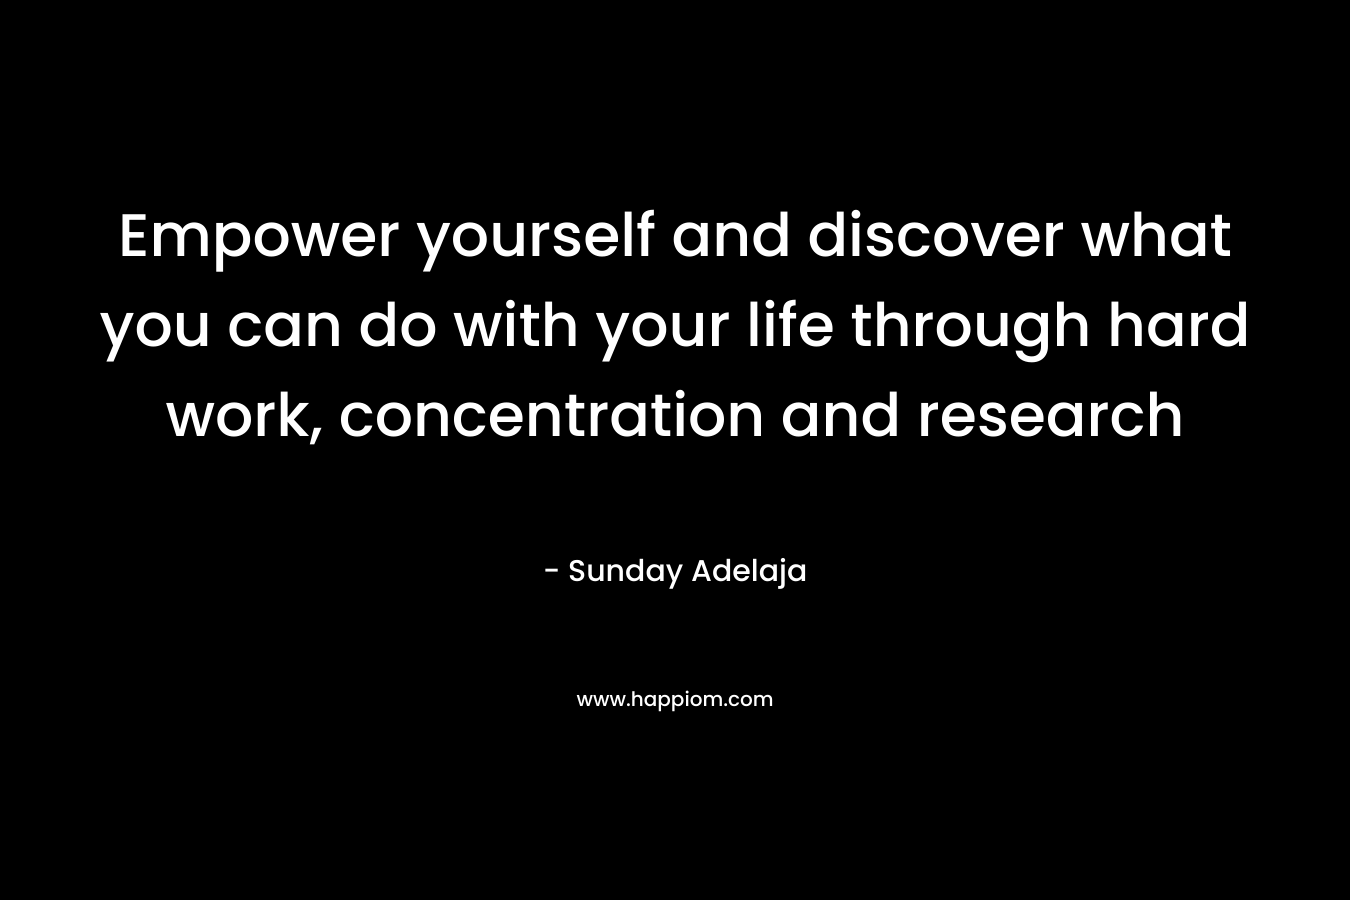 Empower yourself and discover what you can do with your life through hard work, concentration and research